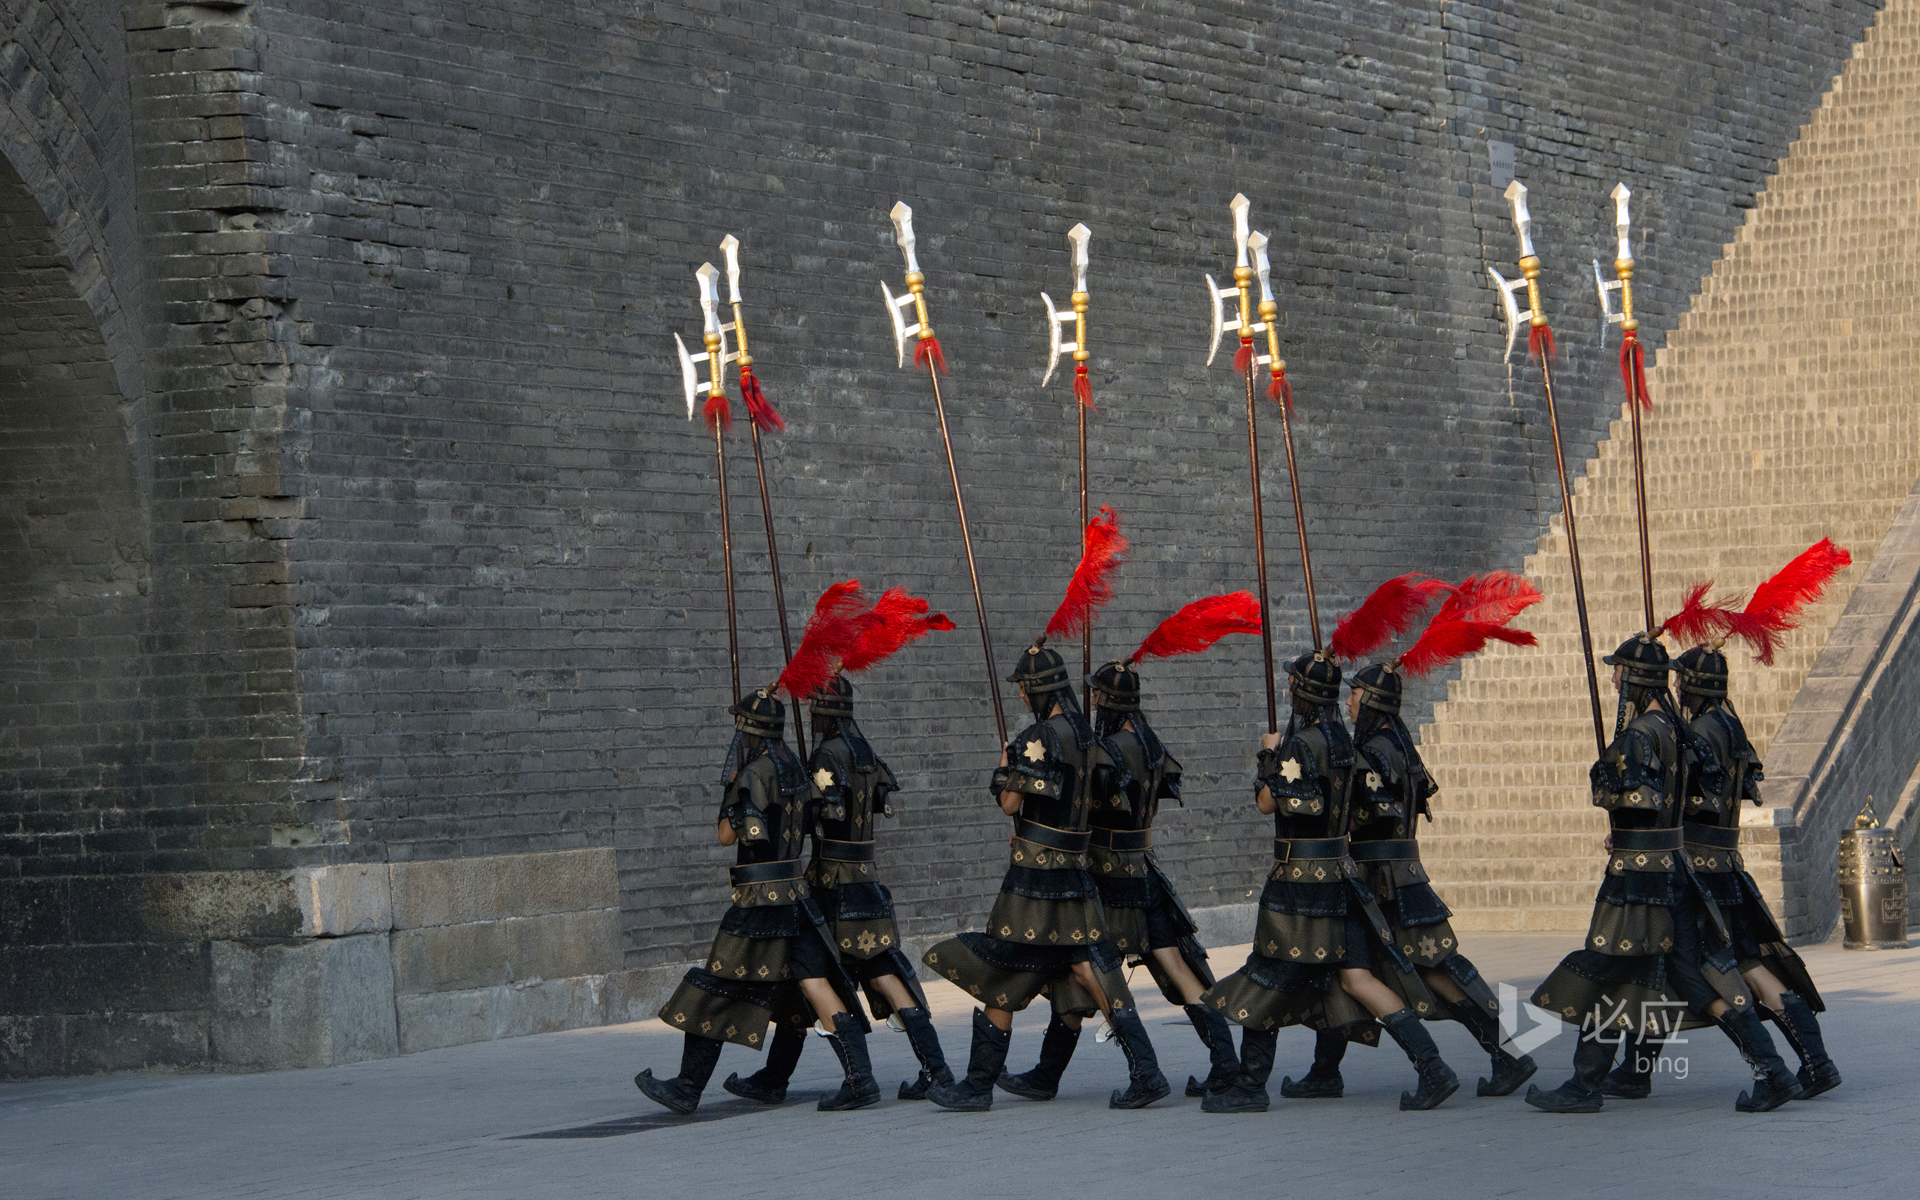 Soldiers wearing Qin costumes at the ancient city wall of Xi'an, Shaanxi